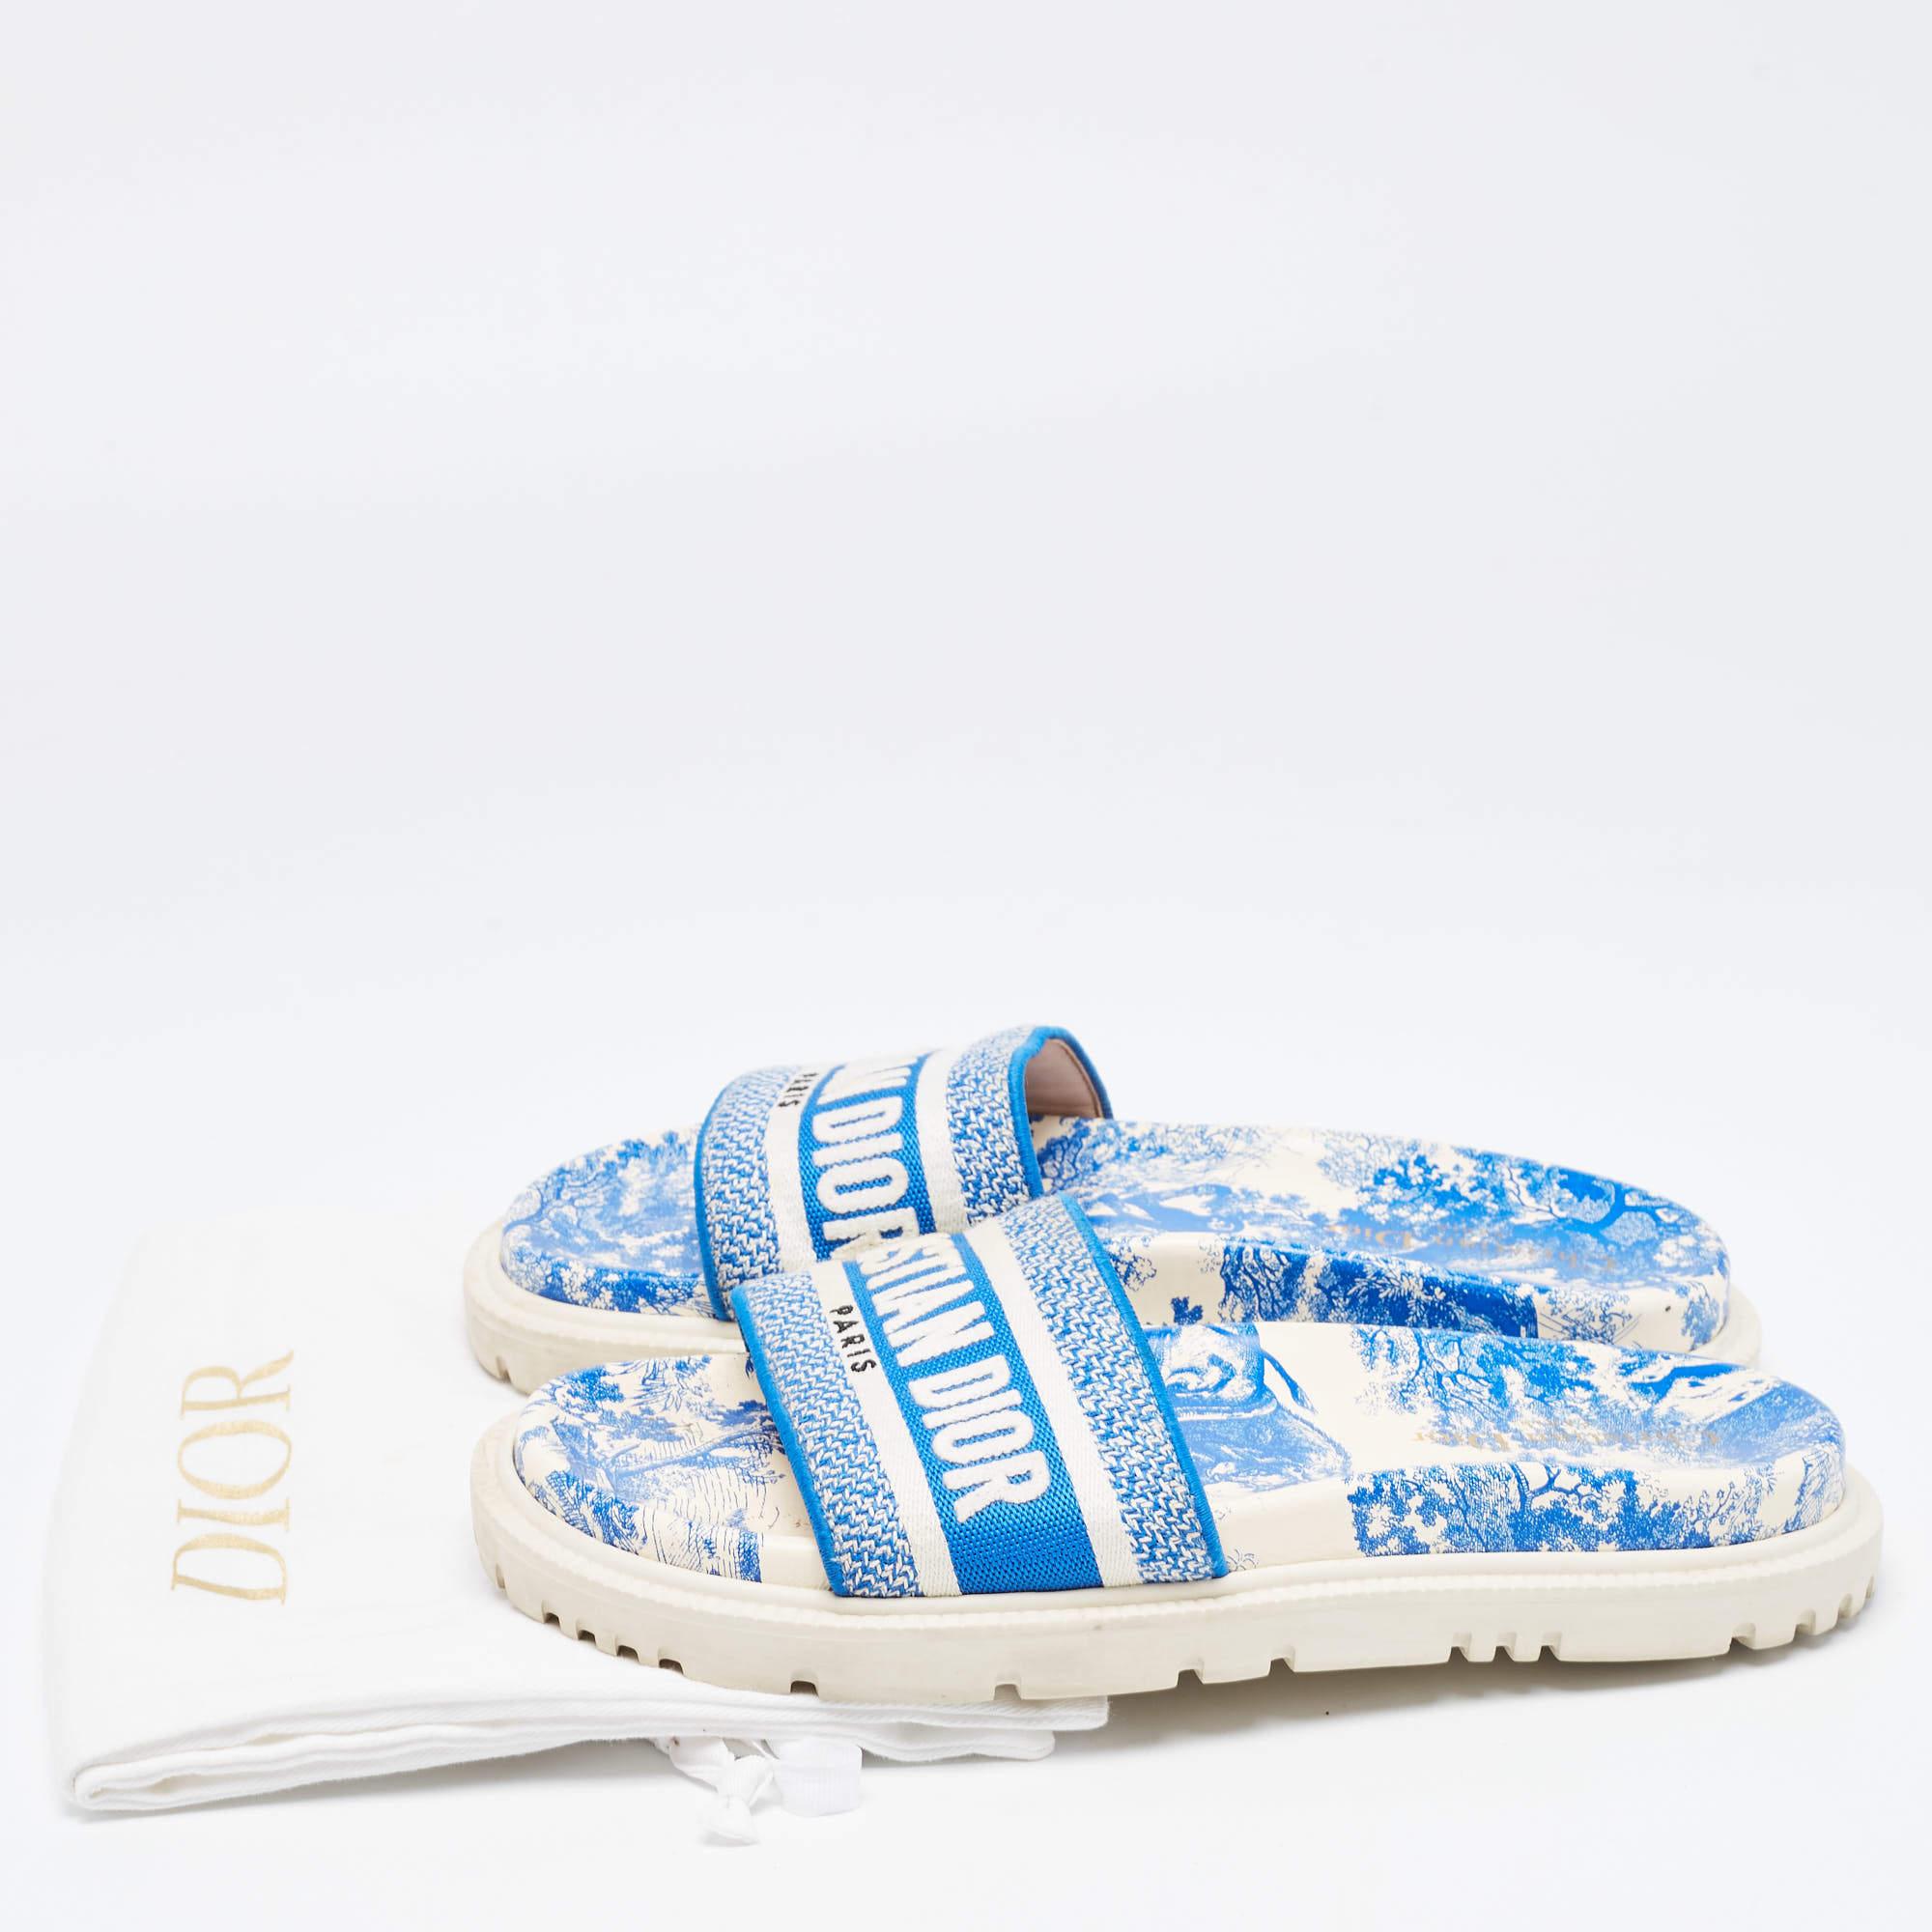 Dior Blue/White Embroidered Canvas Toile De Jouy Dway Slides Size 39 2